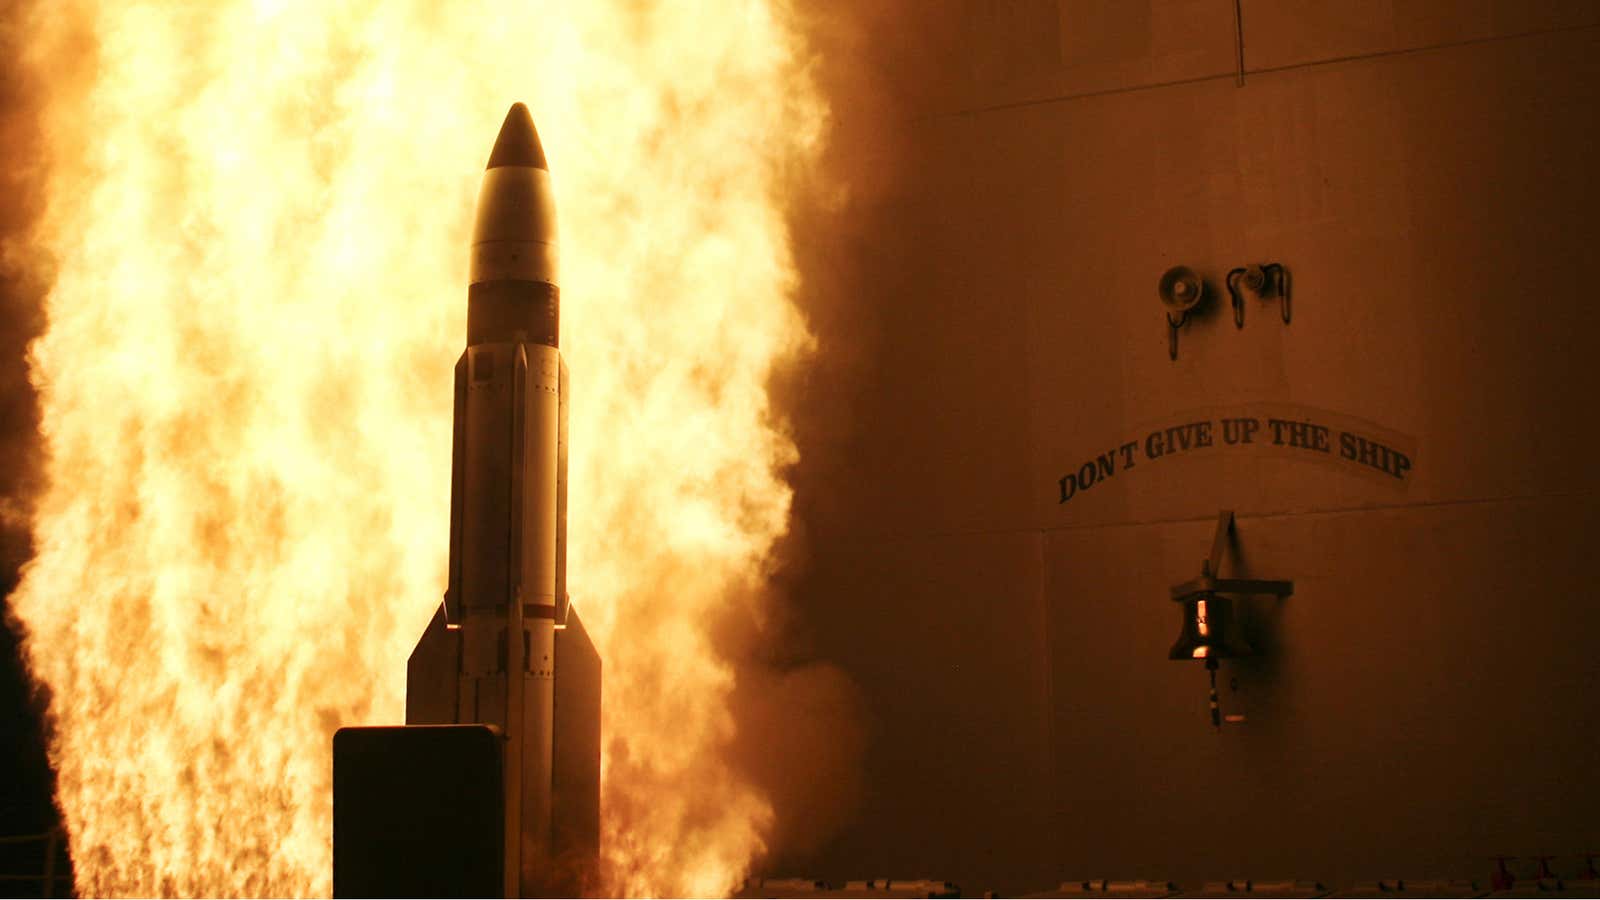 In 2008, the US launched a missile from a warship to destroy a satellite.